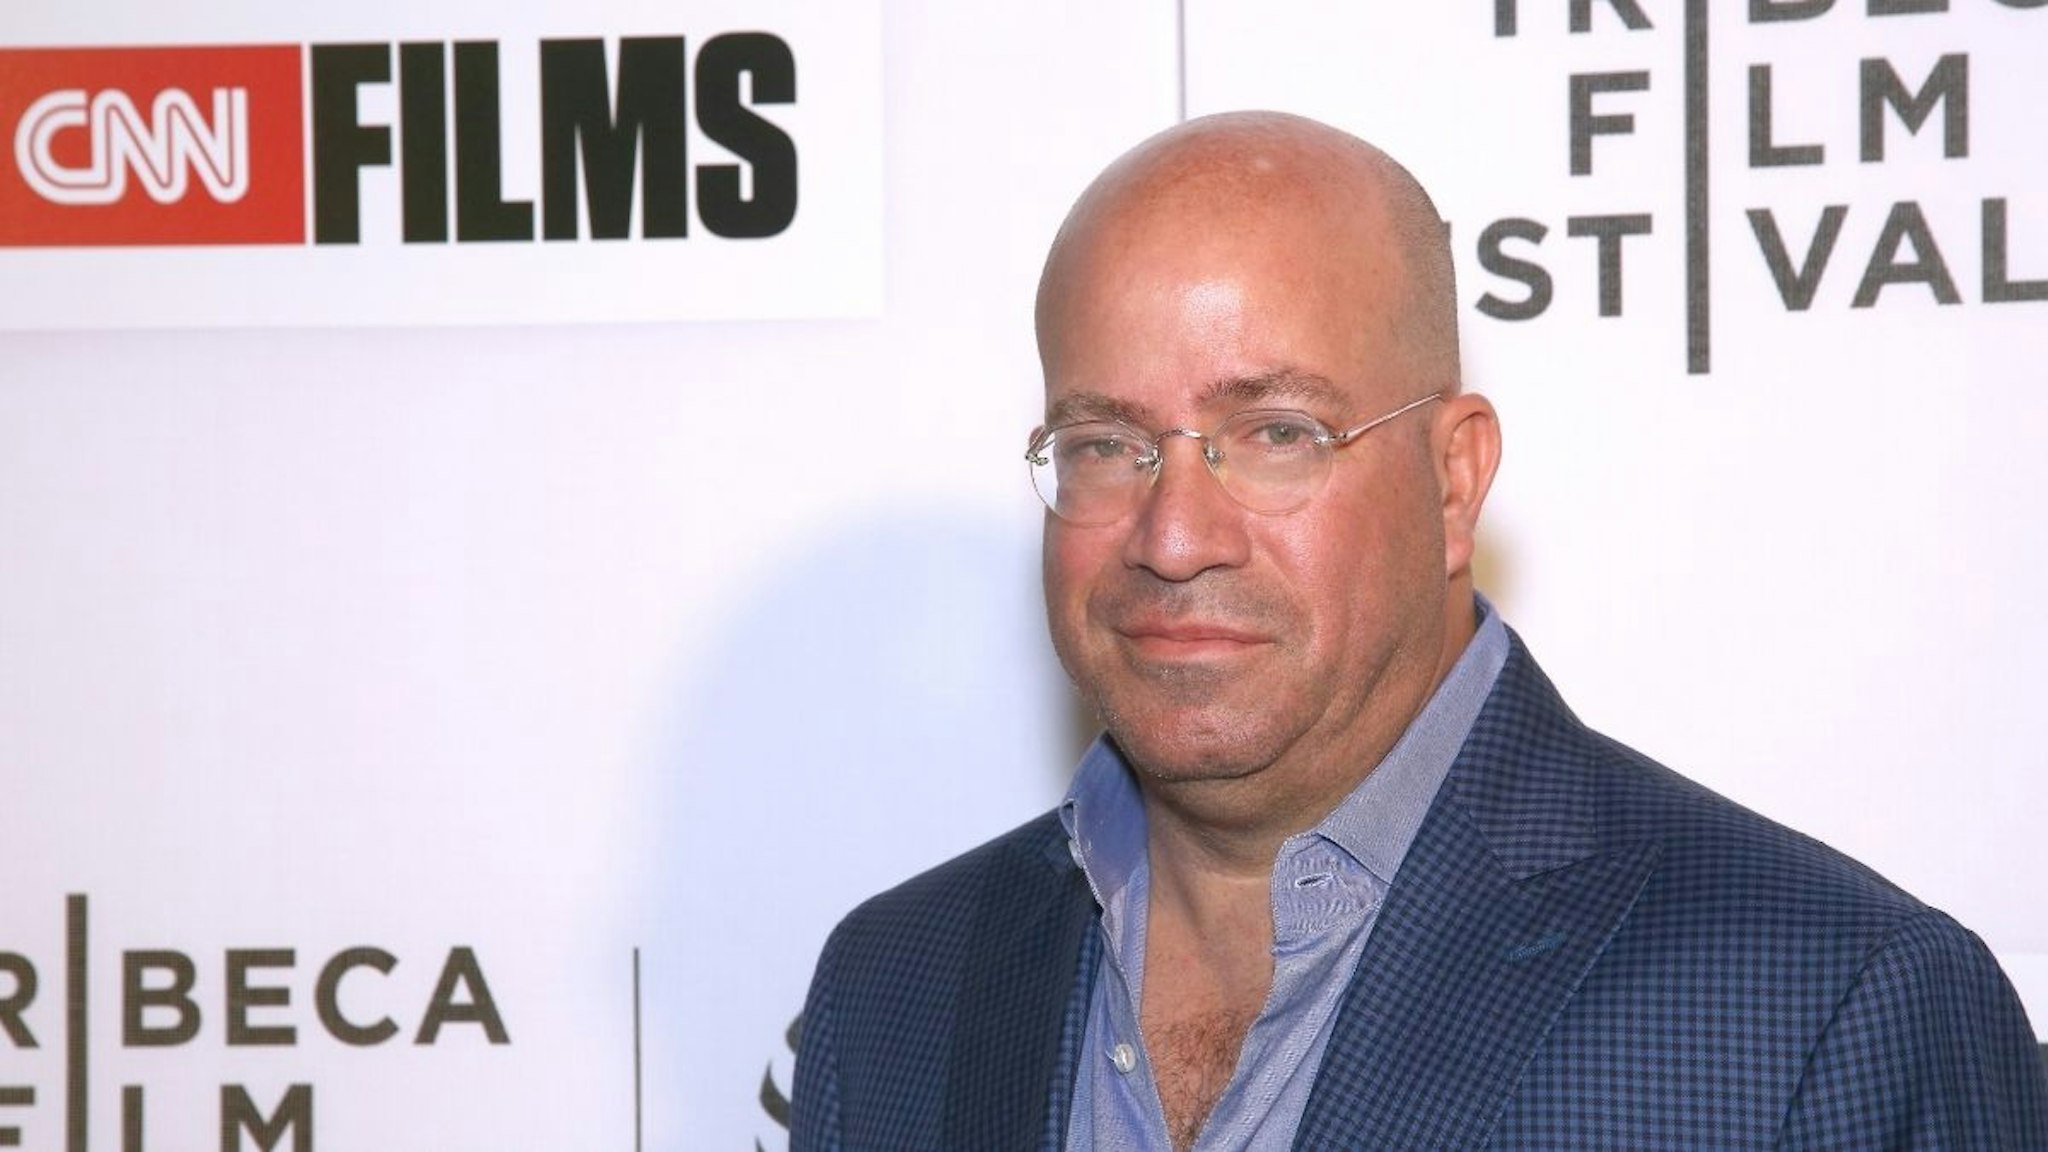 President of CNN Worldwide Jeff Zucker at CNN Films - Jeremiah Tower: The Last Magnificent at TFF Panel & Party on April 16, 2016 in New York City.